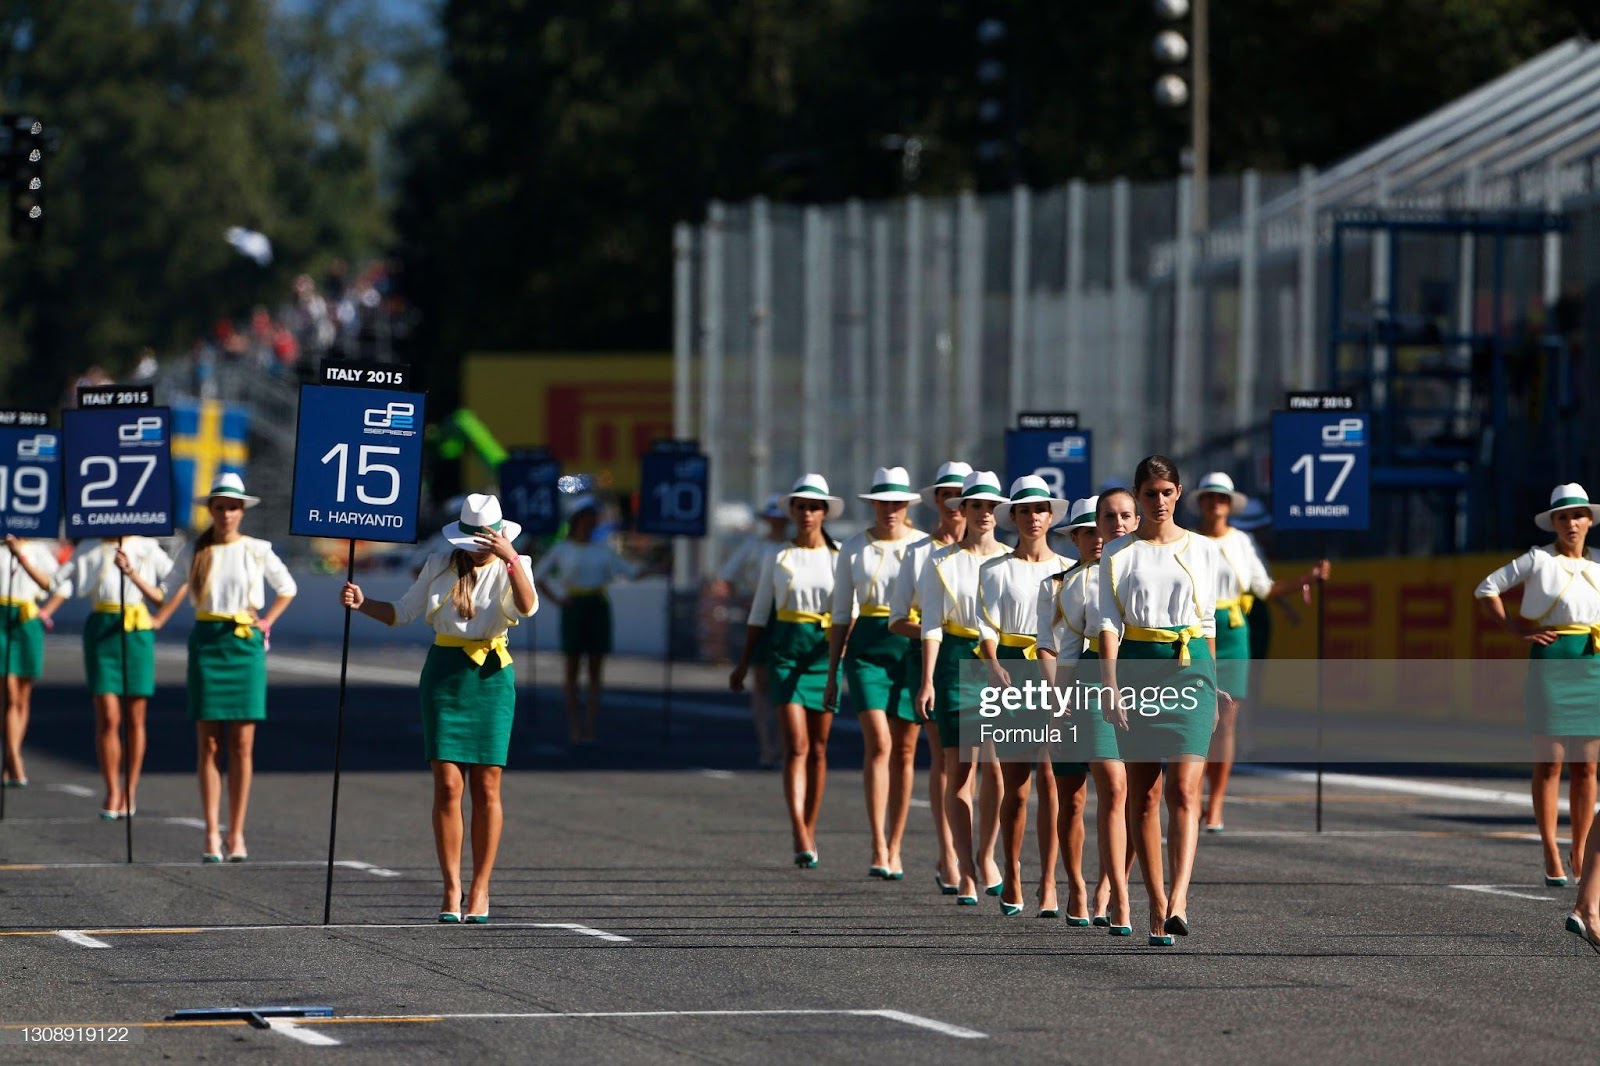 D:\Documenti\posts\posts\Women and motorsport\foto\Getty e altre\Monza\series-round-8-autodromo-di-monza-italy-sunday-6-september-2015-grid-picture-id1308919122.jpg